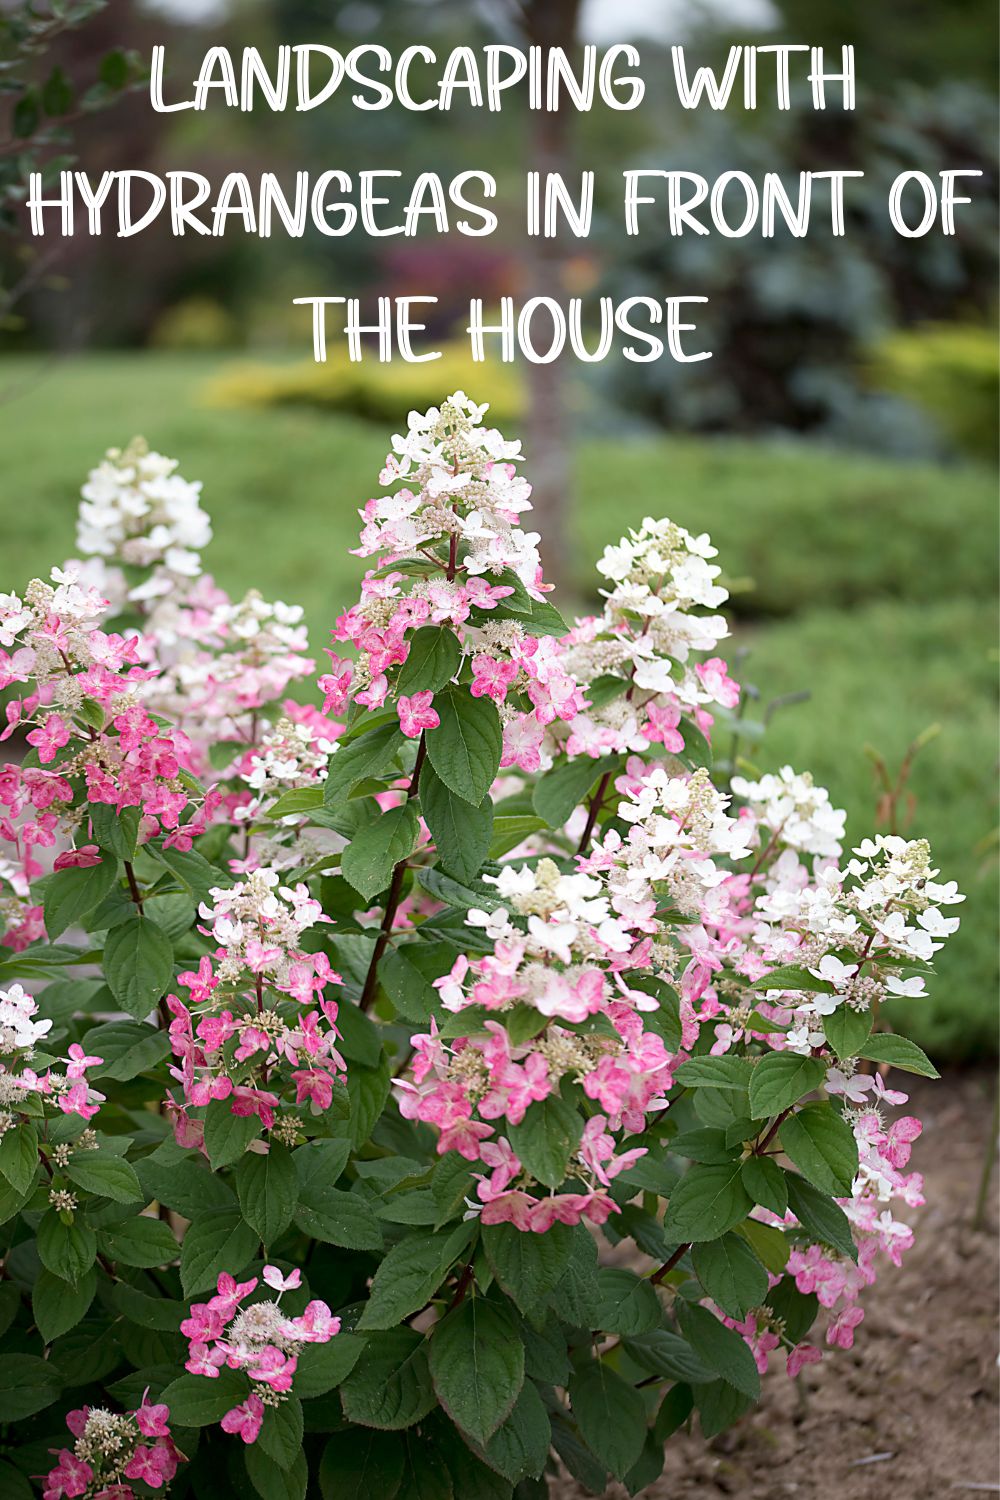 Landscaping with hydrangeas in front of the house.